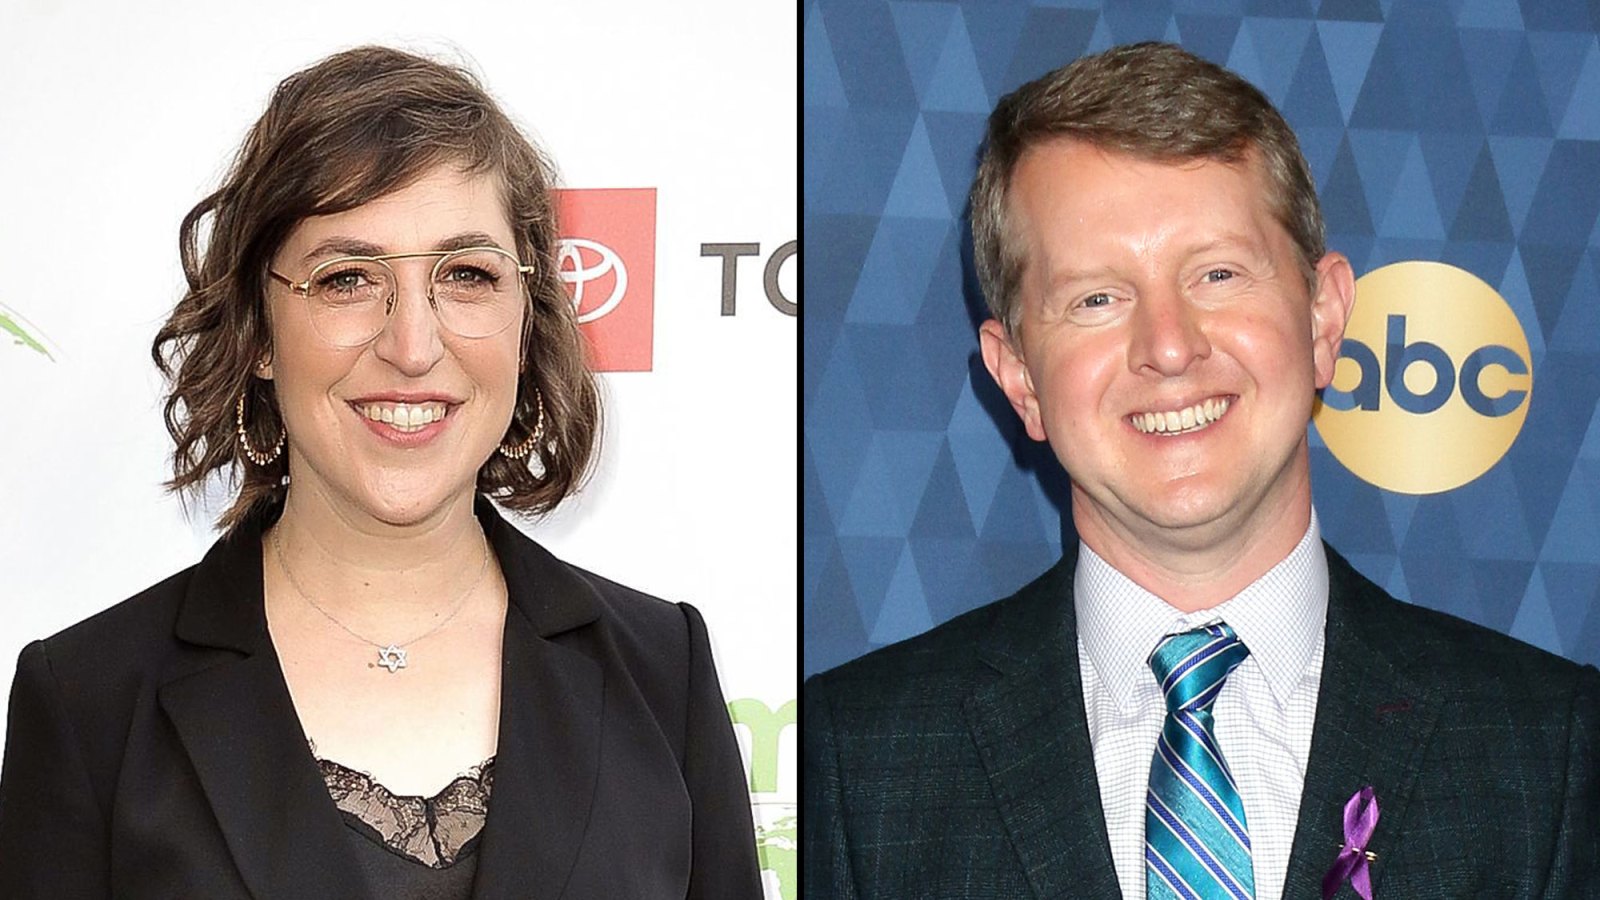 Jeopardy’s Mayim Bialik and Ken Jennings Honor Late ‘Legendary’ Host Alex Trebek on the 1-Year Anniversary of His Death